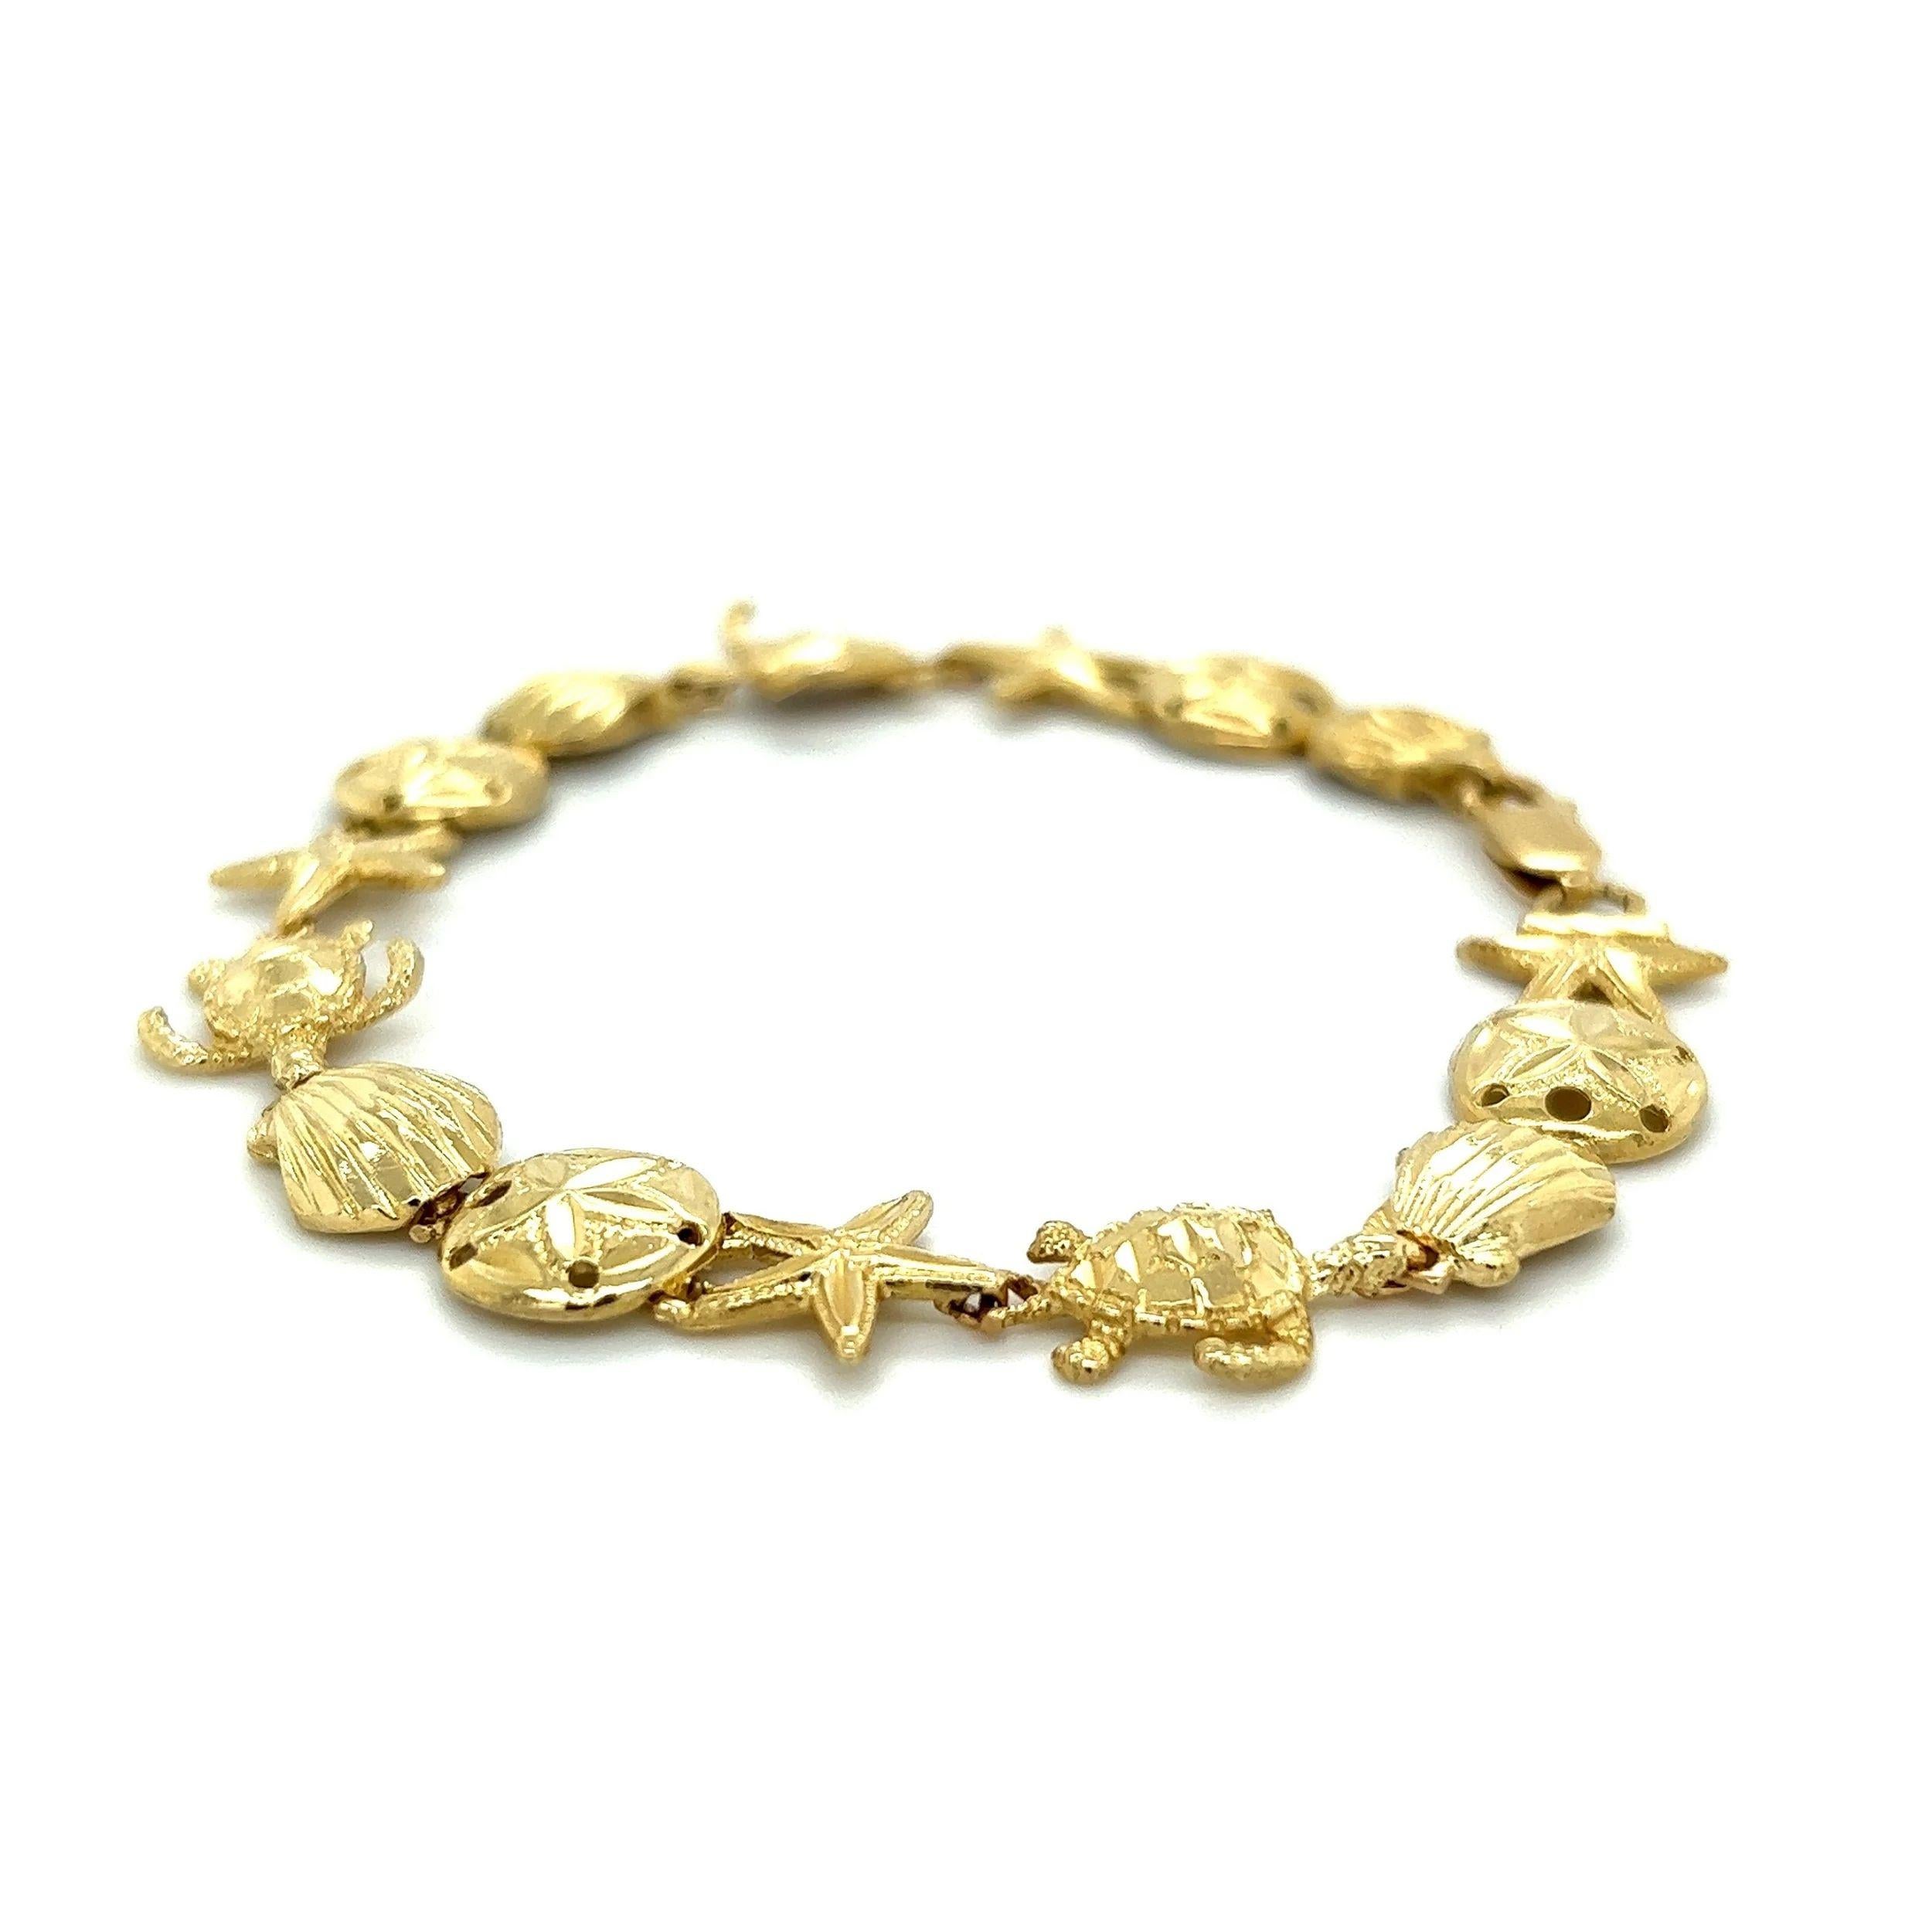 Sand Dollar, Starfish, Seashell, Clam and Turtle Sea Life Gold Link Bracelet In Excellent Condition For Sale In Montreal, QC